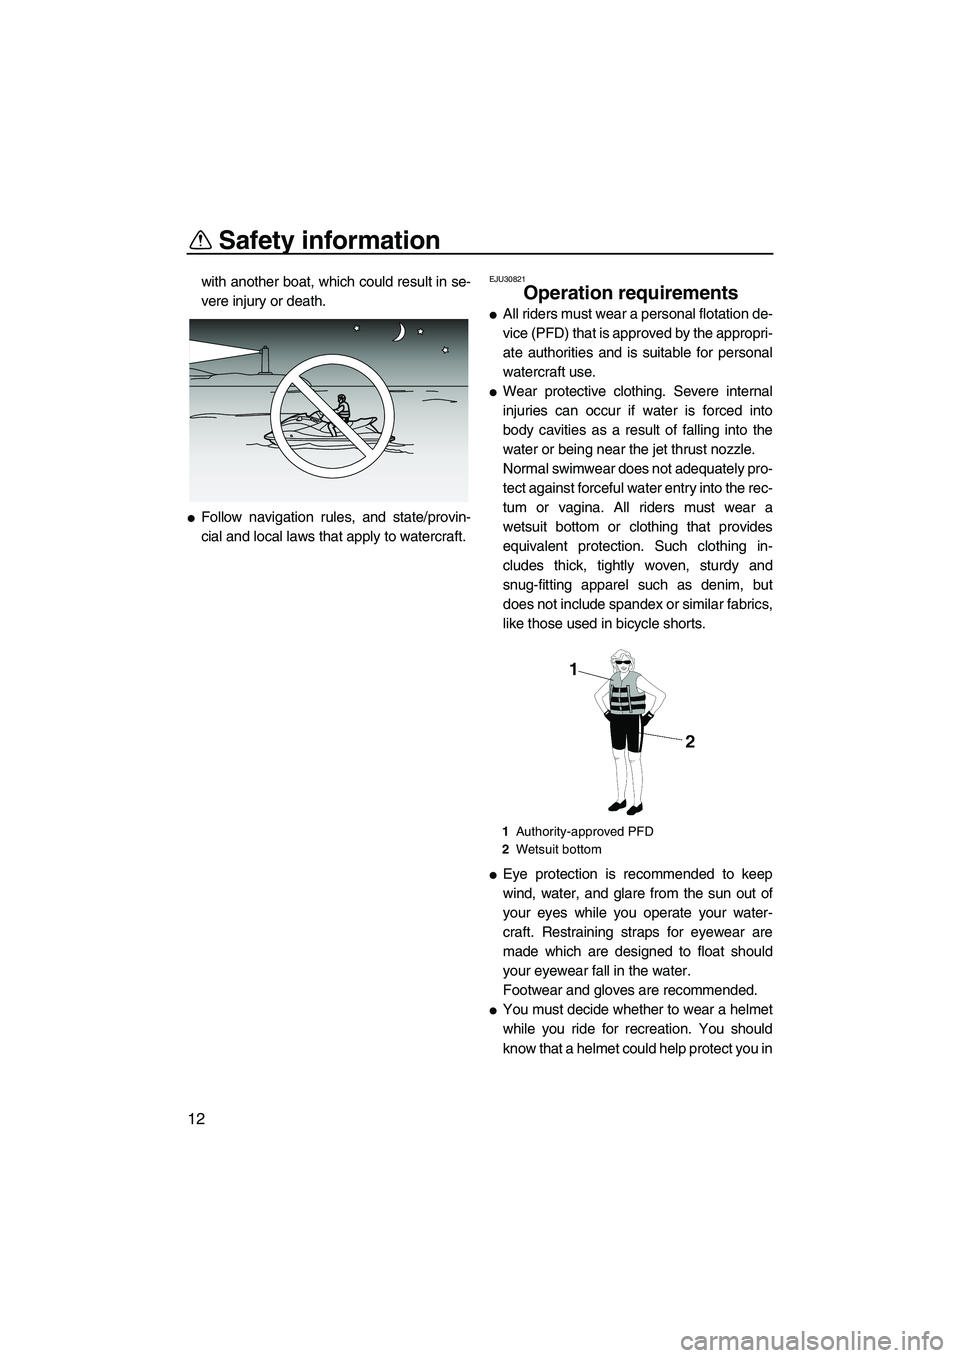 YAMAHA VX SPORT 2013 User Guide Safety information
12
with another boat, which could result in se-
vere injury or death.
●Follow navigation rules, and state/provin-
cial and local laws that apply to watercraft.
EJU30821
Operation 